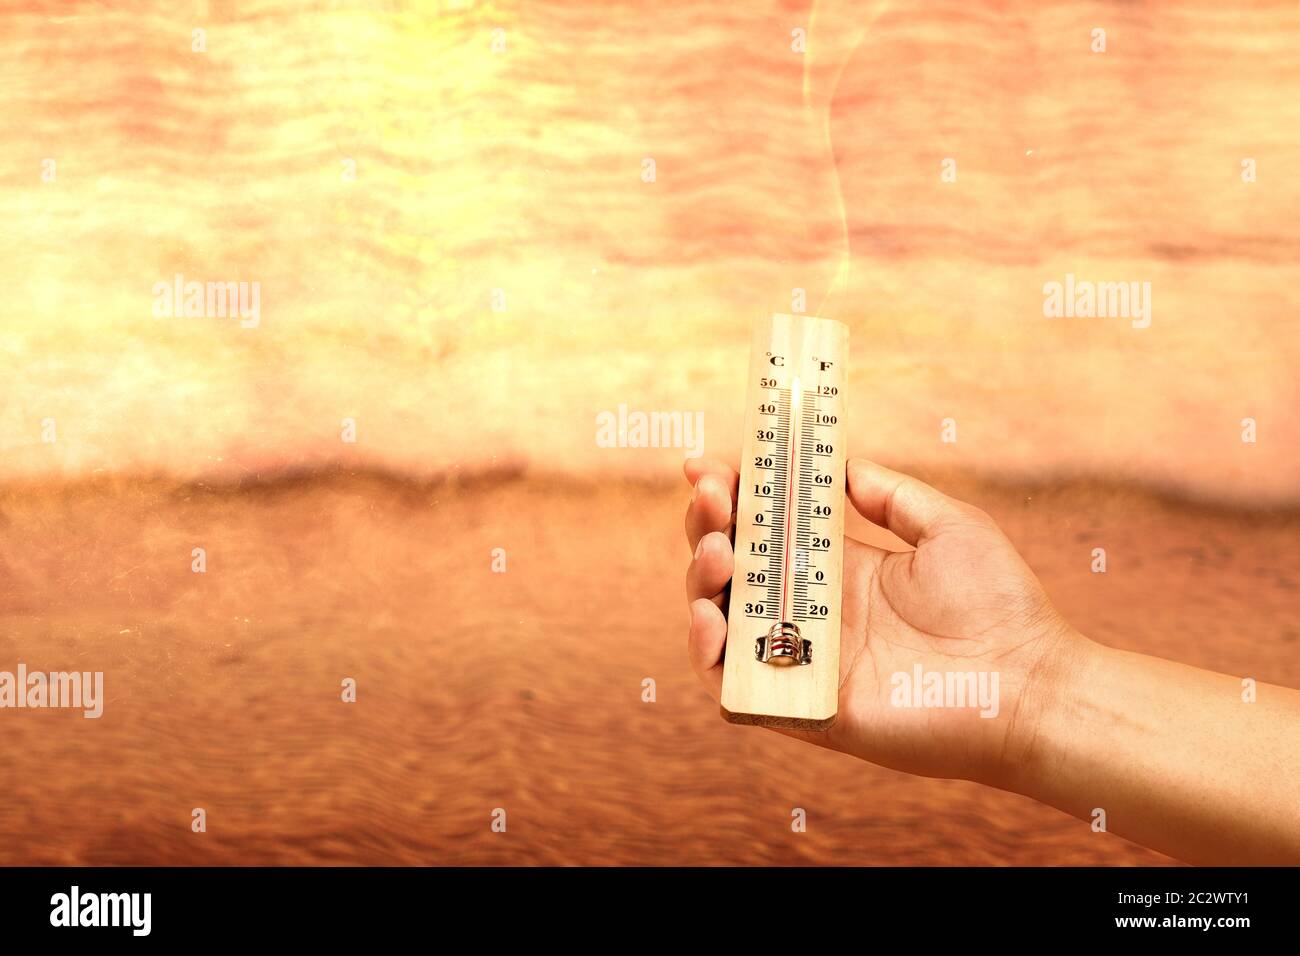 https://c8.alamy.com/comp/2C2WTY1/hand-holding-thermometer-with-high-temperature-on-the-beach-with-glowing-sun-background-heatwave-concept-2C2WTY1.jpg